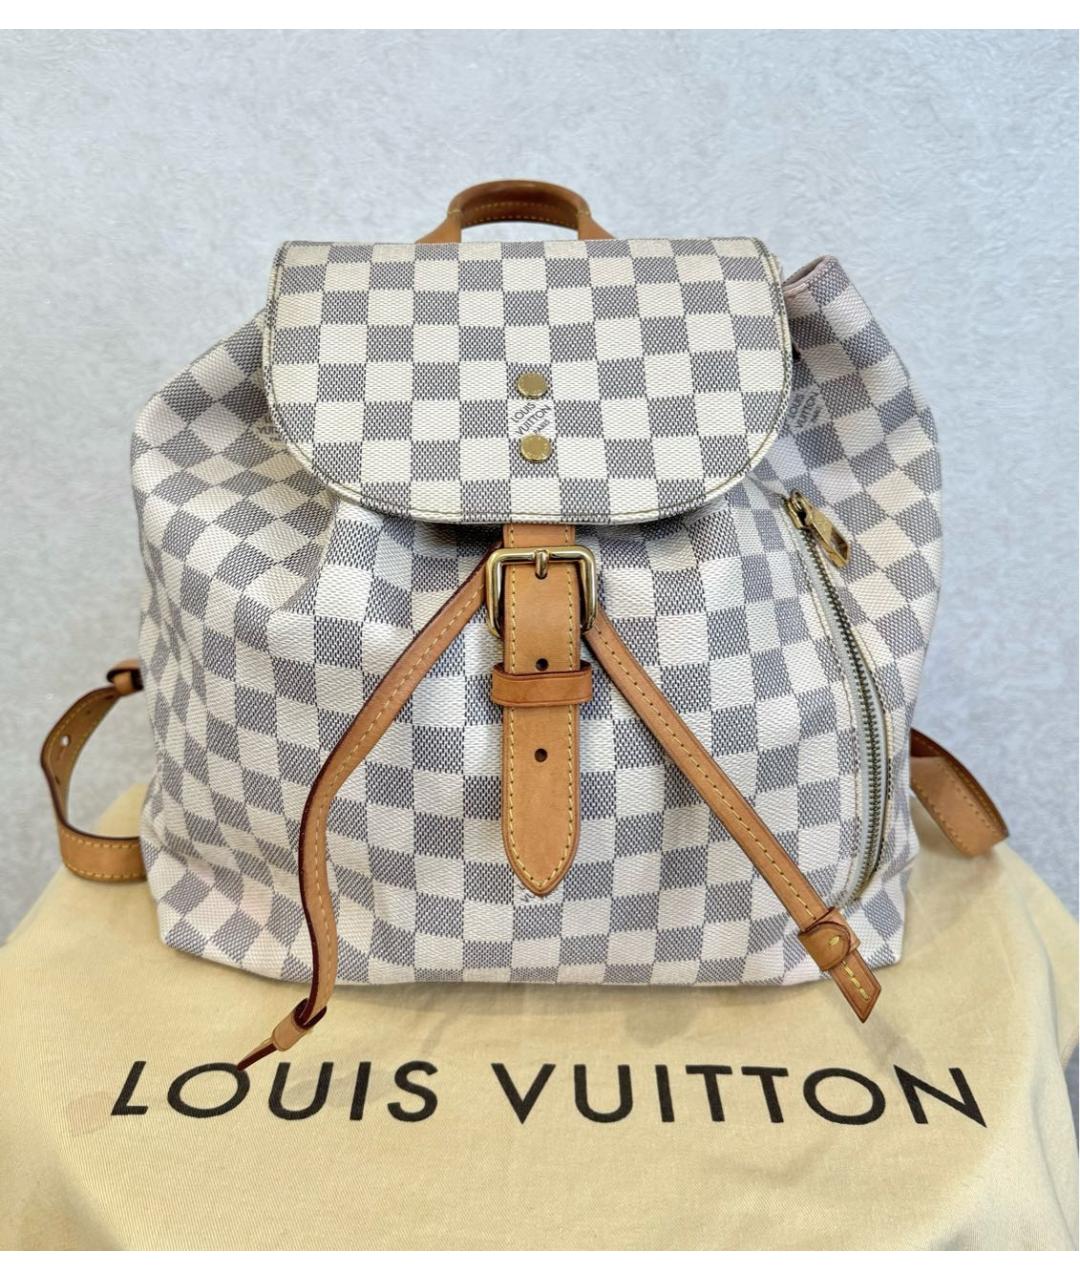 LOUIS VUITTON PRE-OWNED Белый рюкзак, фото 3